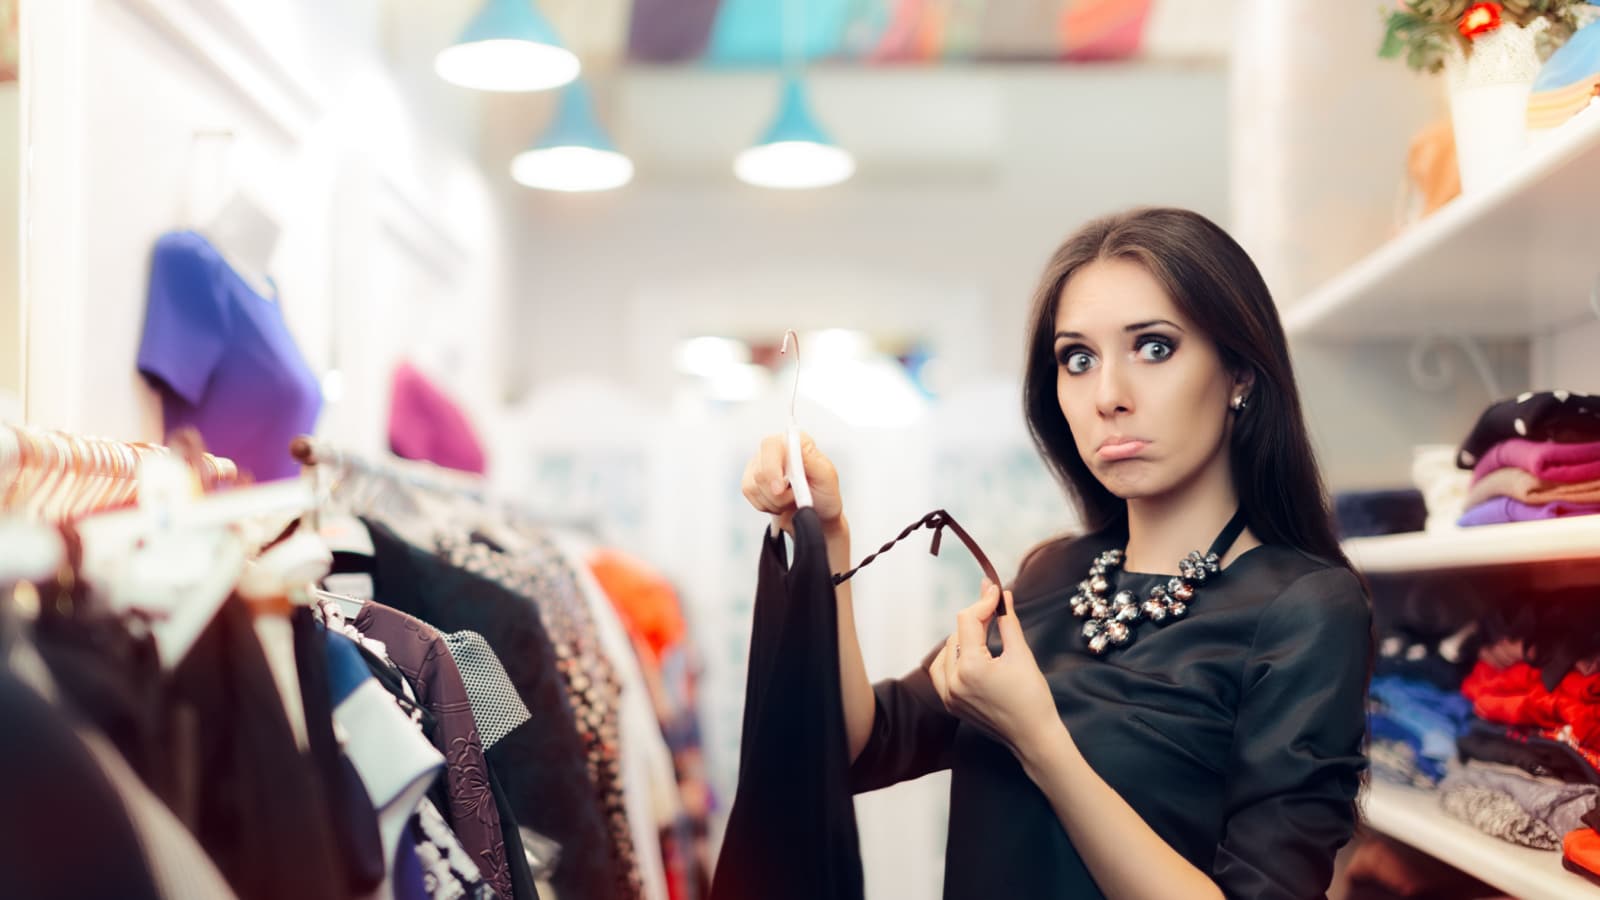 An editorial photo of a woman holding a piece of on a hanger inside a clothing store. She's holding the price tag in one hand and looking at the camera with an exaggerated frowning face.